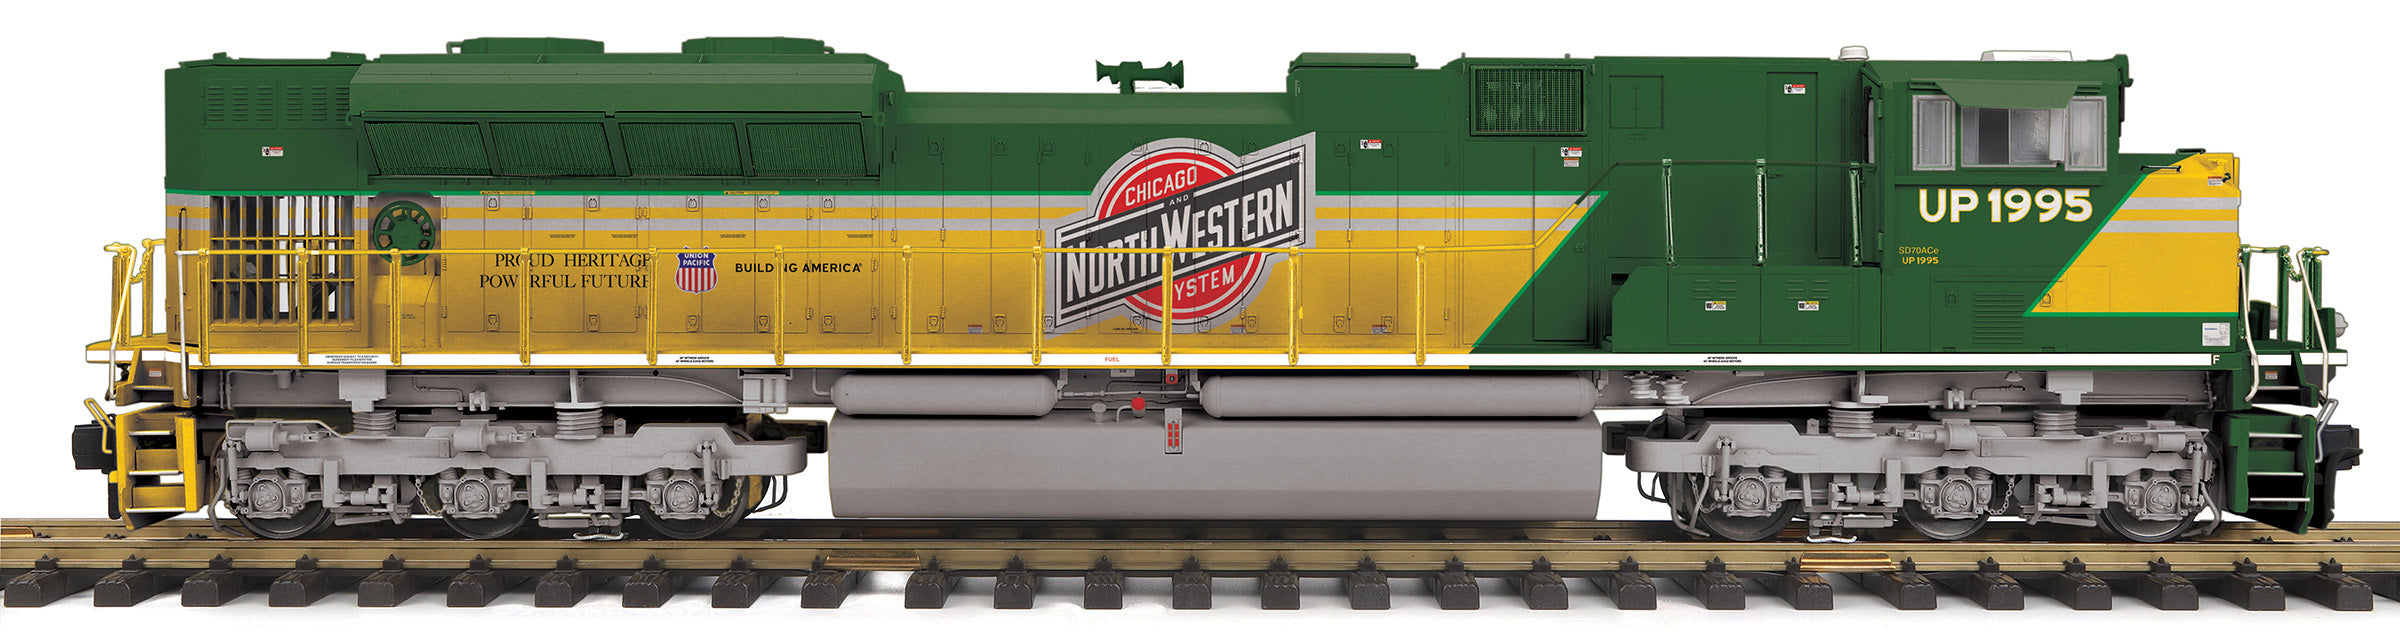 MTH G 70-2164-1 - SD70AH Diesel Engine "Chicago & North Western" #1995 w/ PS3 (UP Heritage) - Custom Run for MrMuffin'sTrains / Sidetrack Hobbies